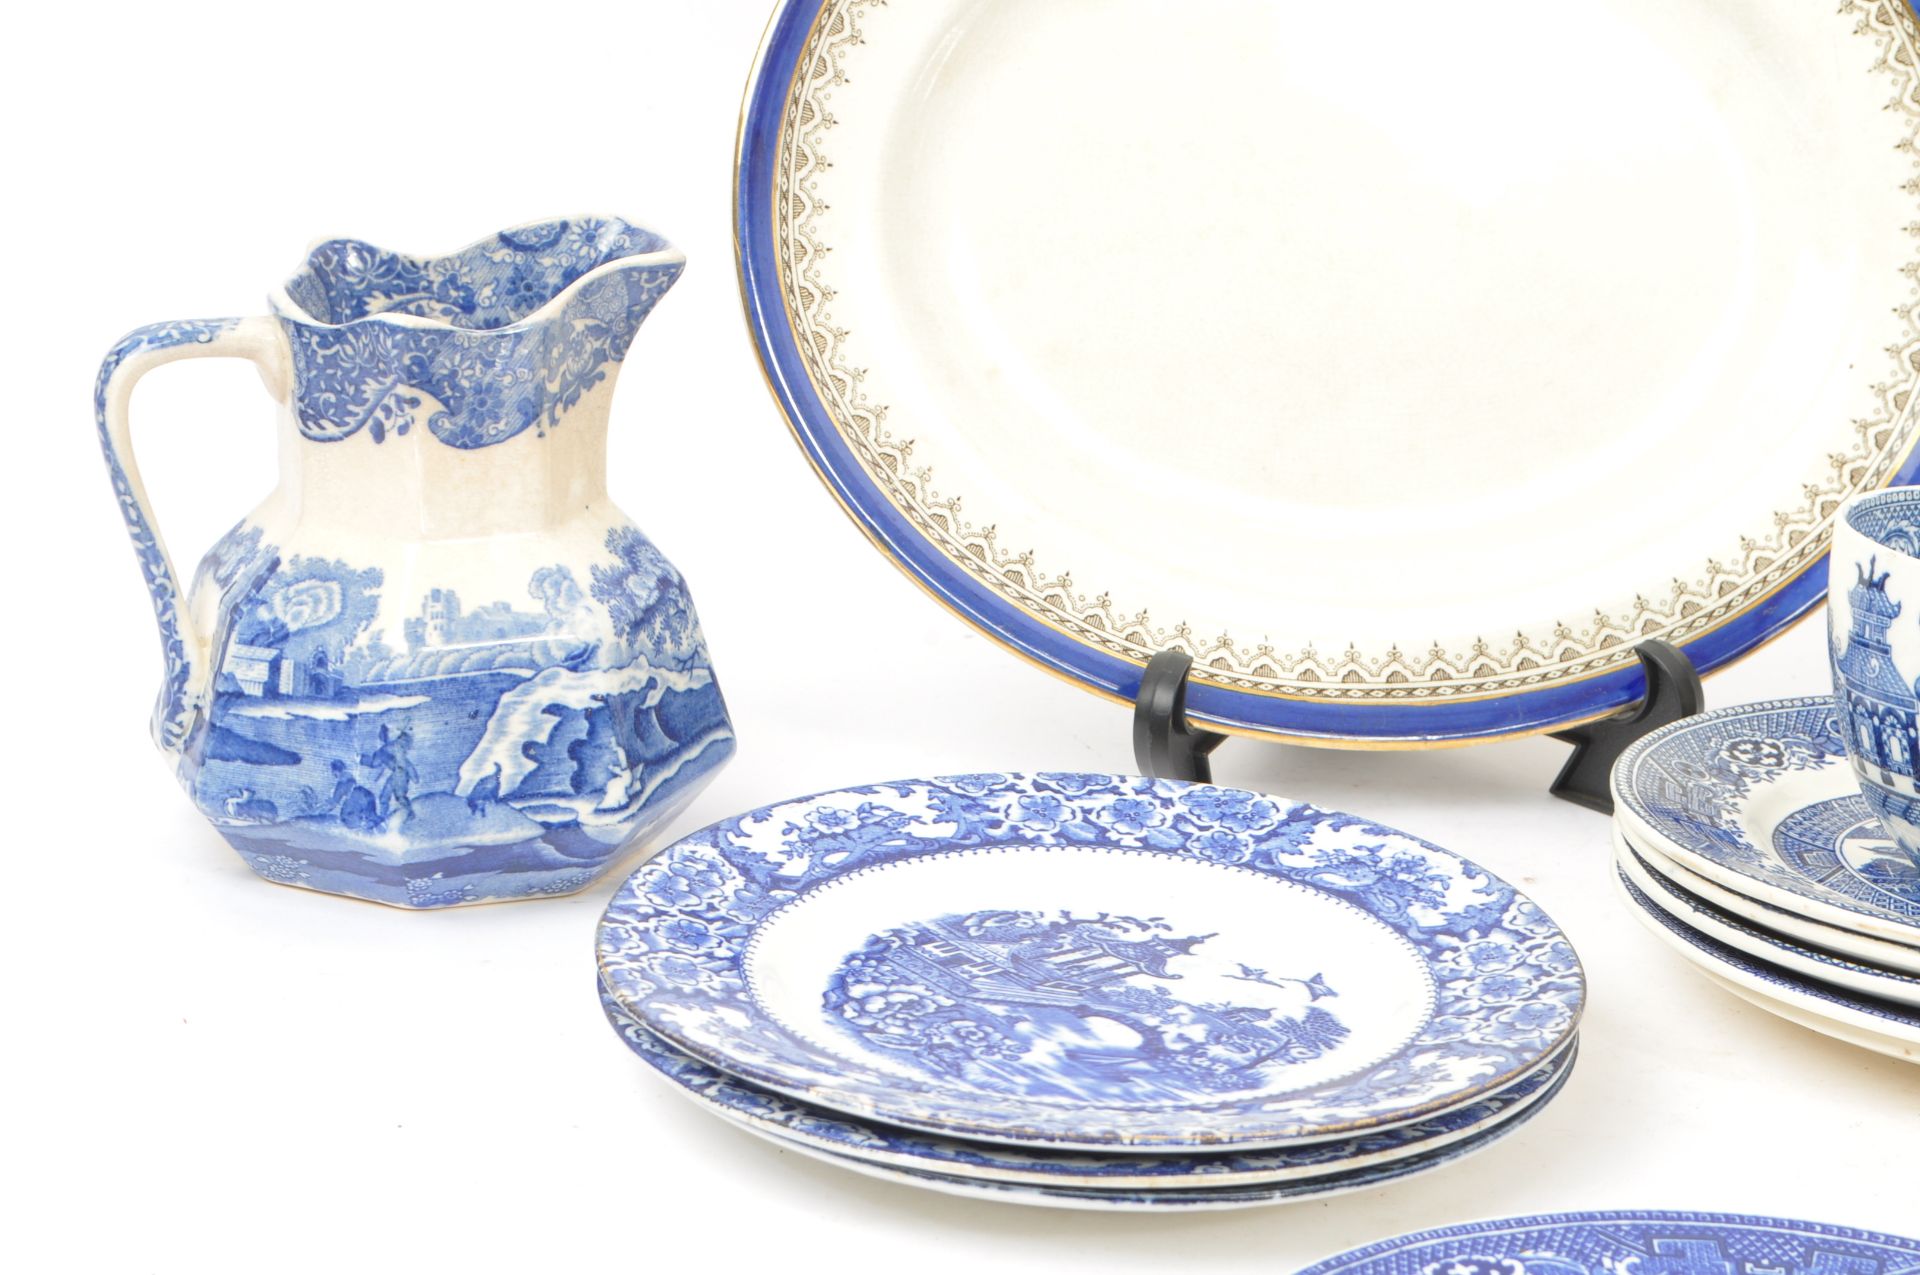 ROYAL DOULTON / SPODE / STAFFORDSHIRE - BLUE AND WHITE PORCELAIN - Image 2 of 8